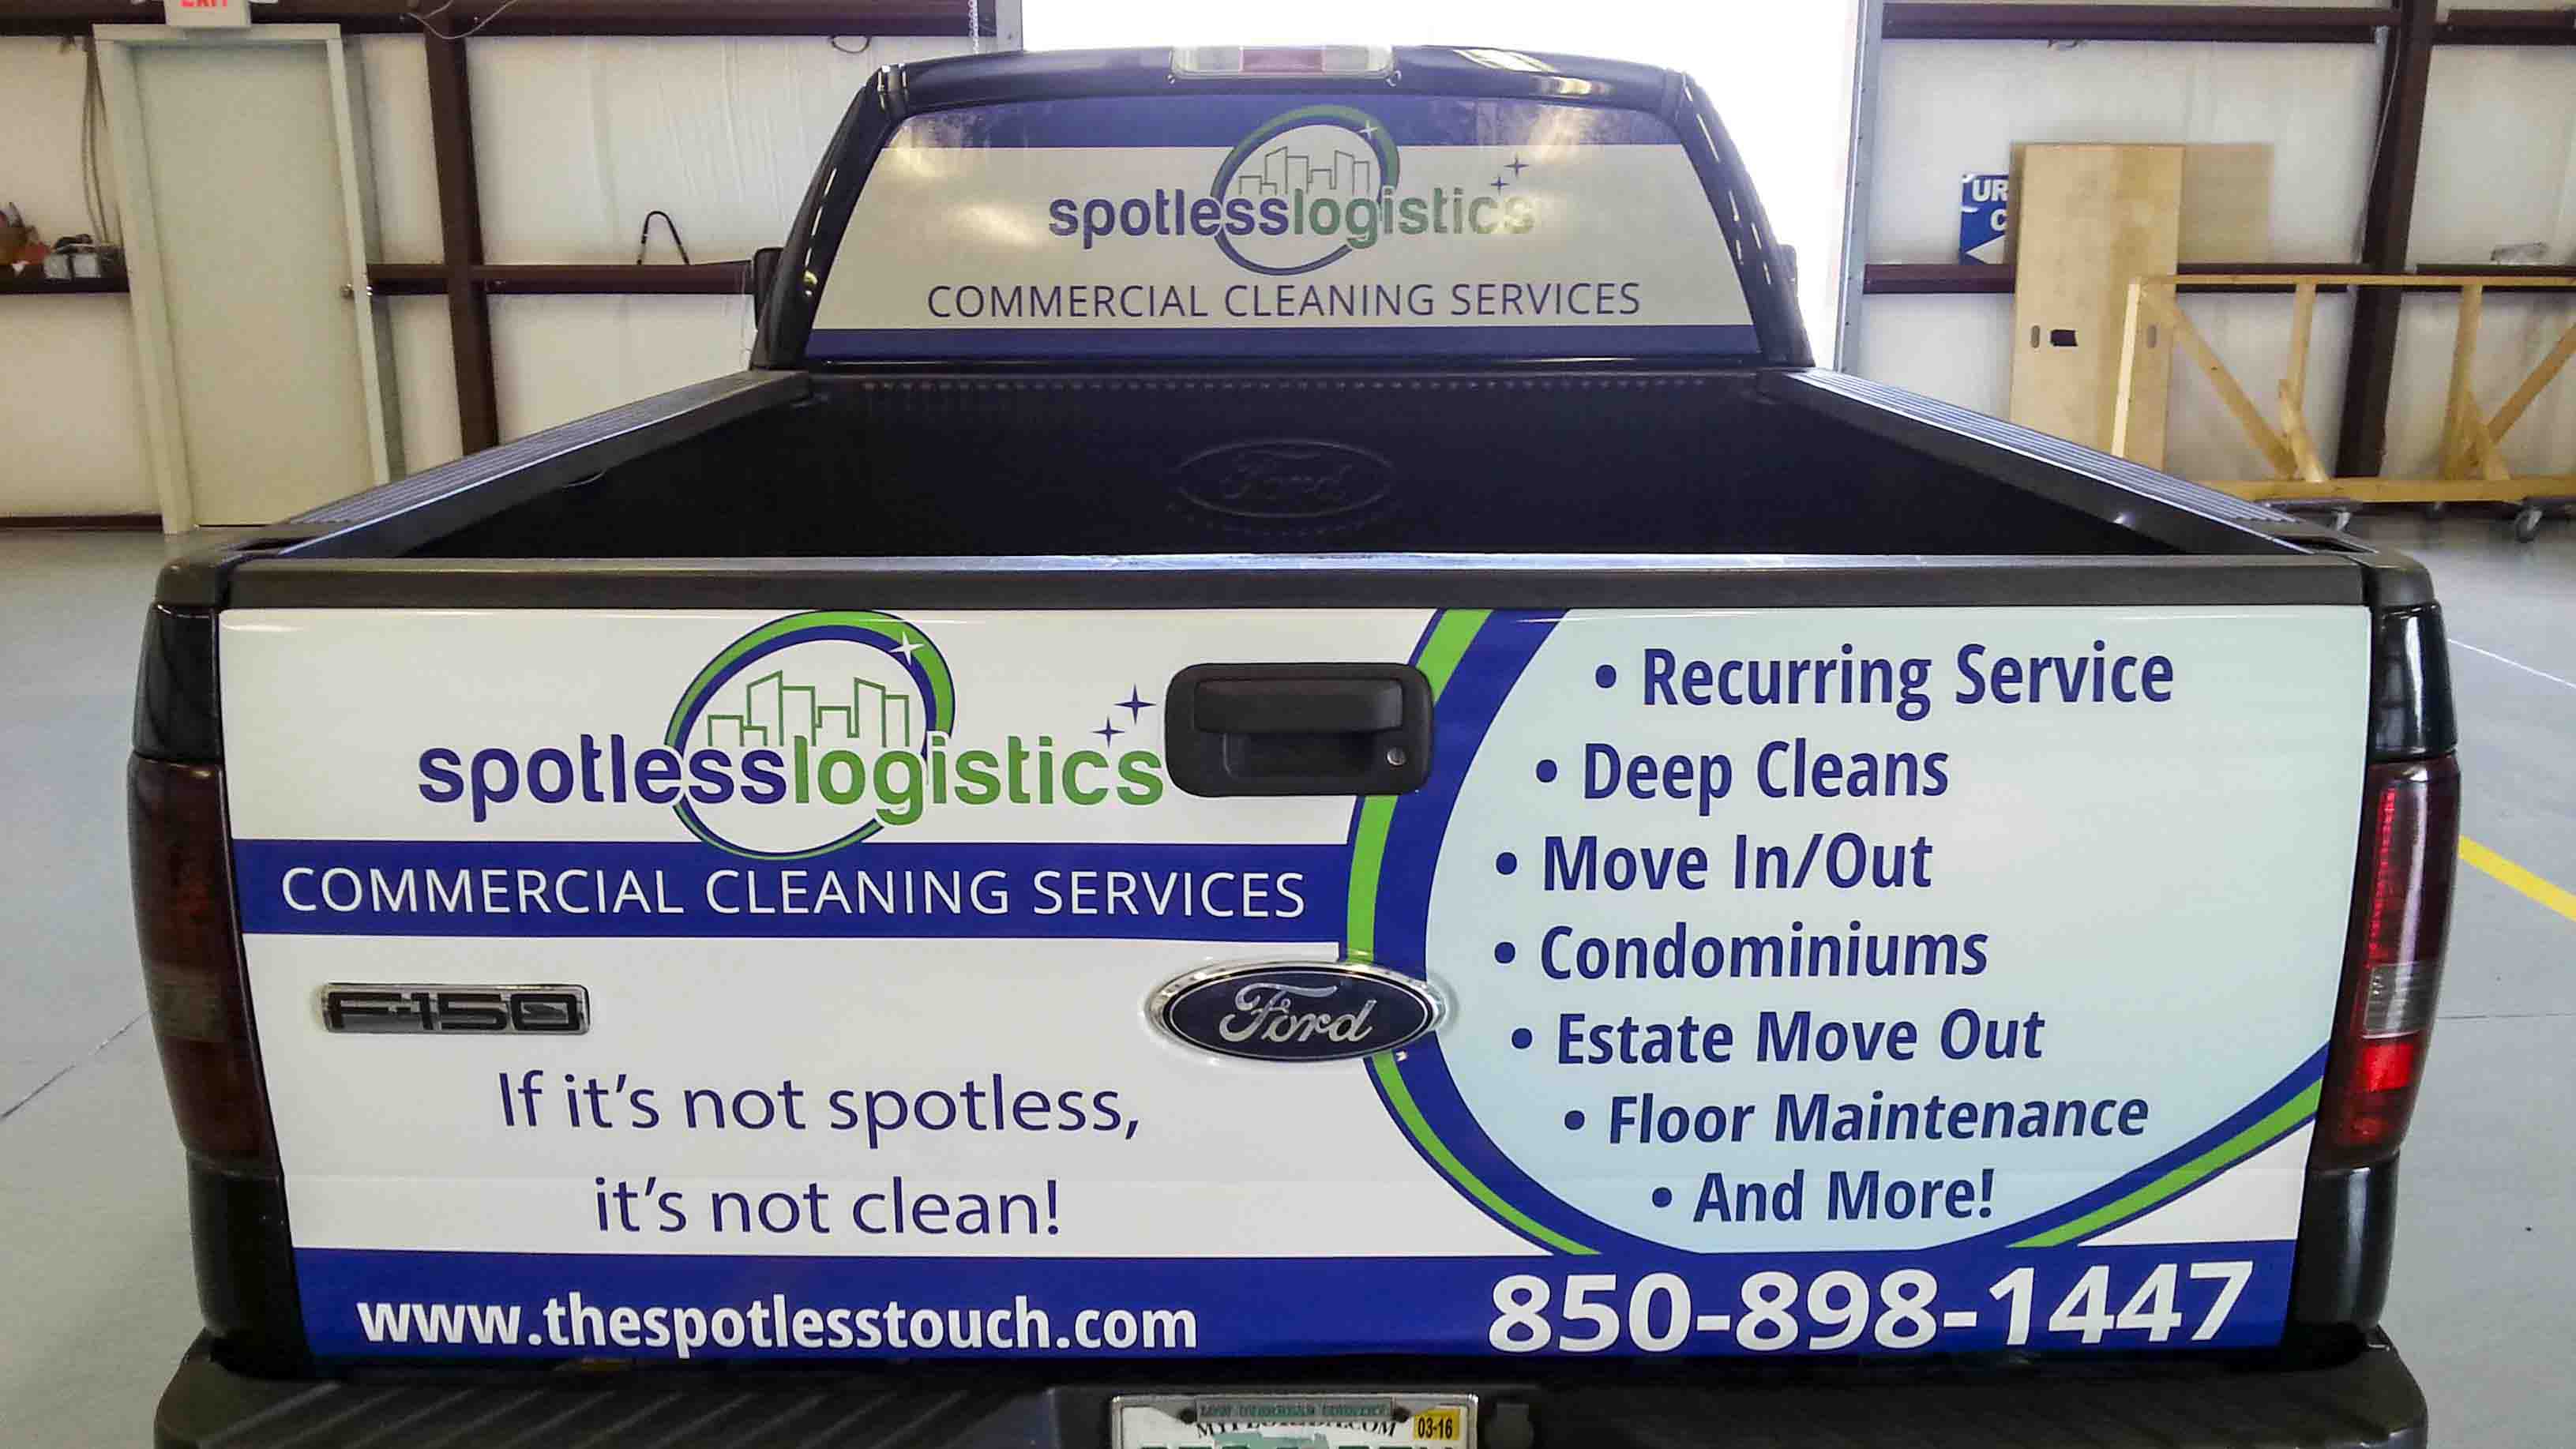 Pensacola Sign Vehicle Graphics - Graphics for Spotless Logistics truck